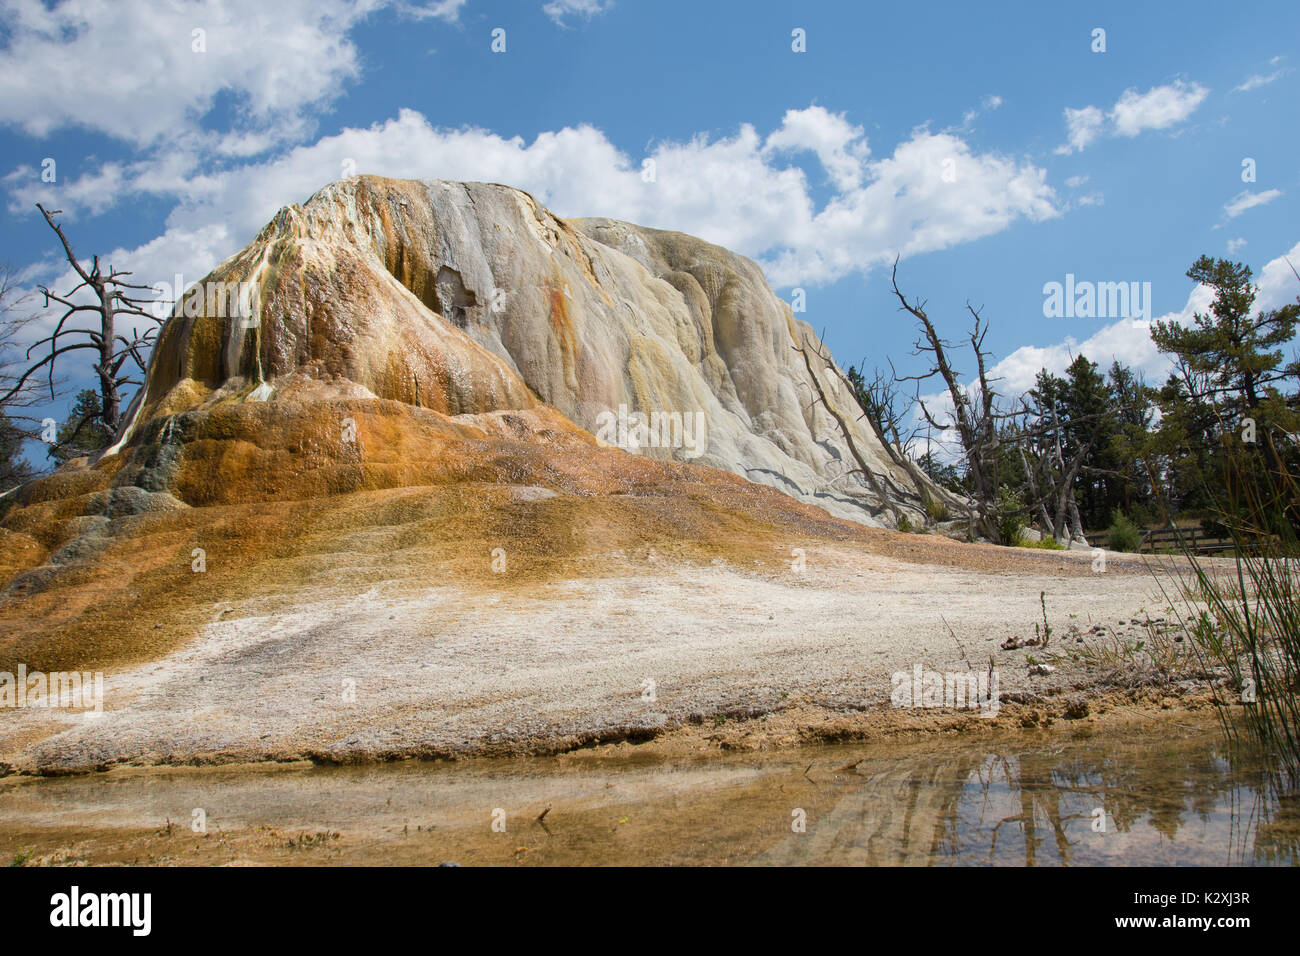 The Orange Spring Mound at Mammoth Hot Springs in Yellowstone National Park, WY Stock Photo